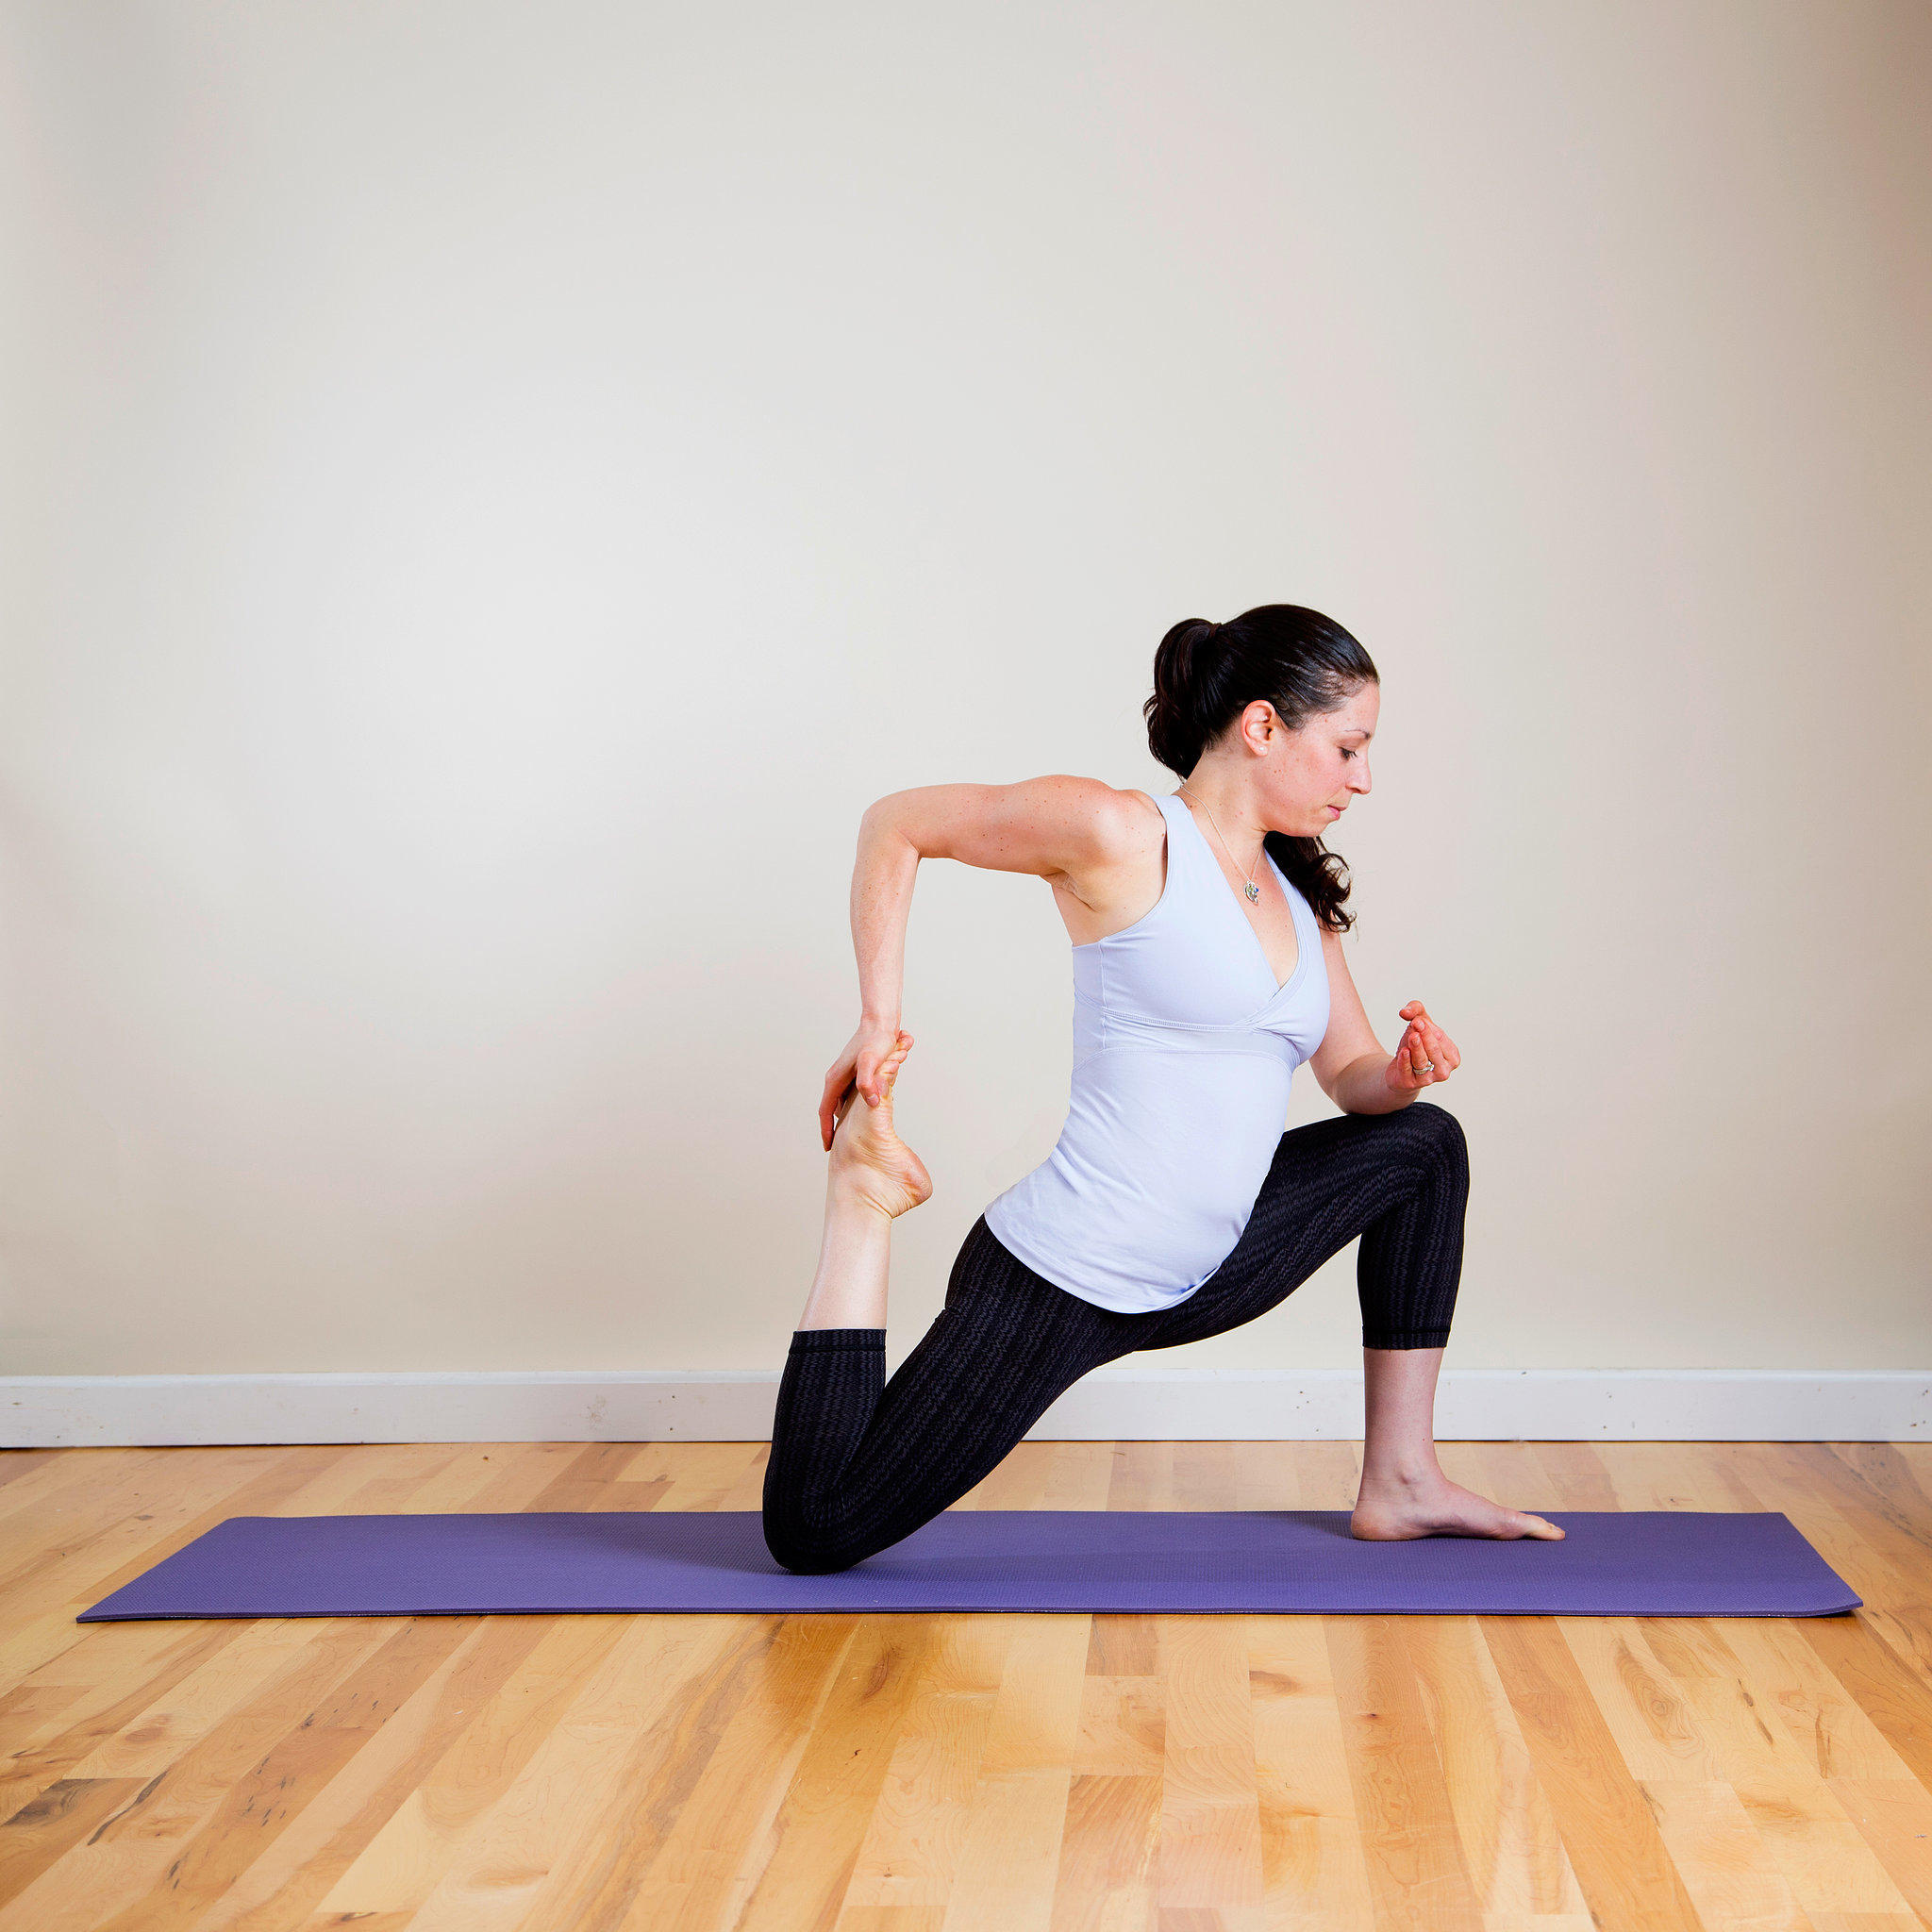 Quad poses Please  Runners, Your yoga   quads  Stretch After Don't This Kneeling Skip